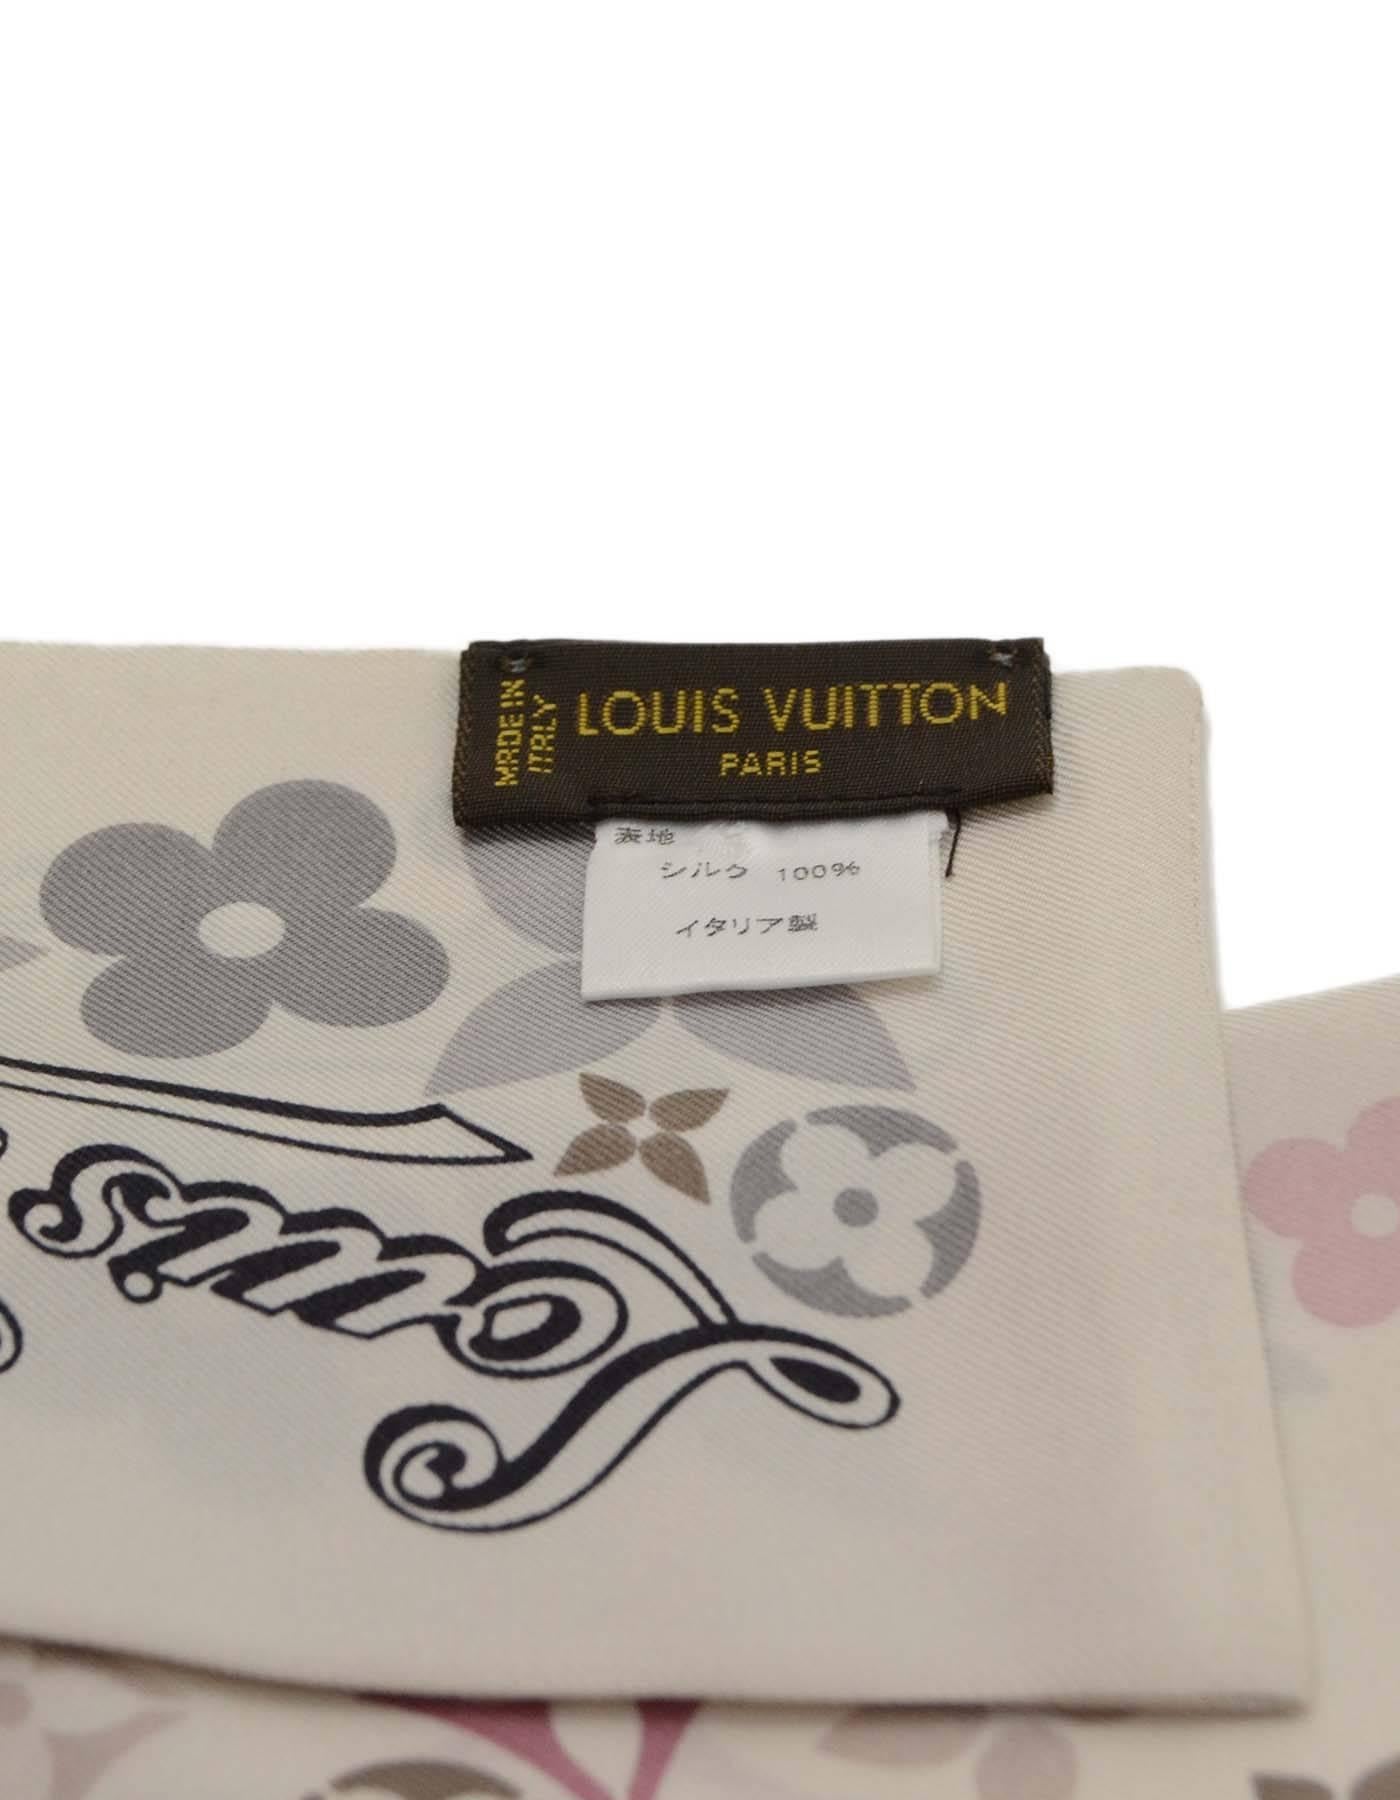 Louis Vuitton Multi-Colored Narrow Silk Scarf 
Features monogram flowers printed throughout
Made In: Italy
Color: Ivory, pink, purple, magenta, grey and black
Composition: 100% silk
Overall Condition: Excellent pre-owned